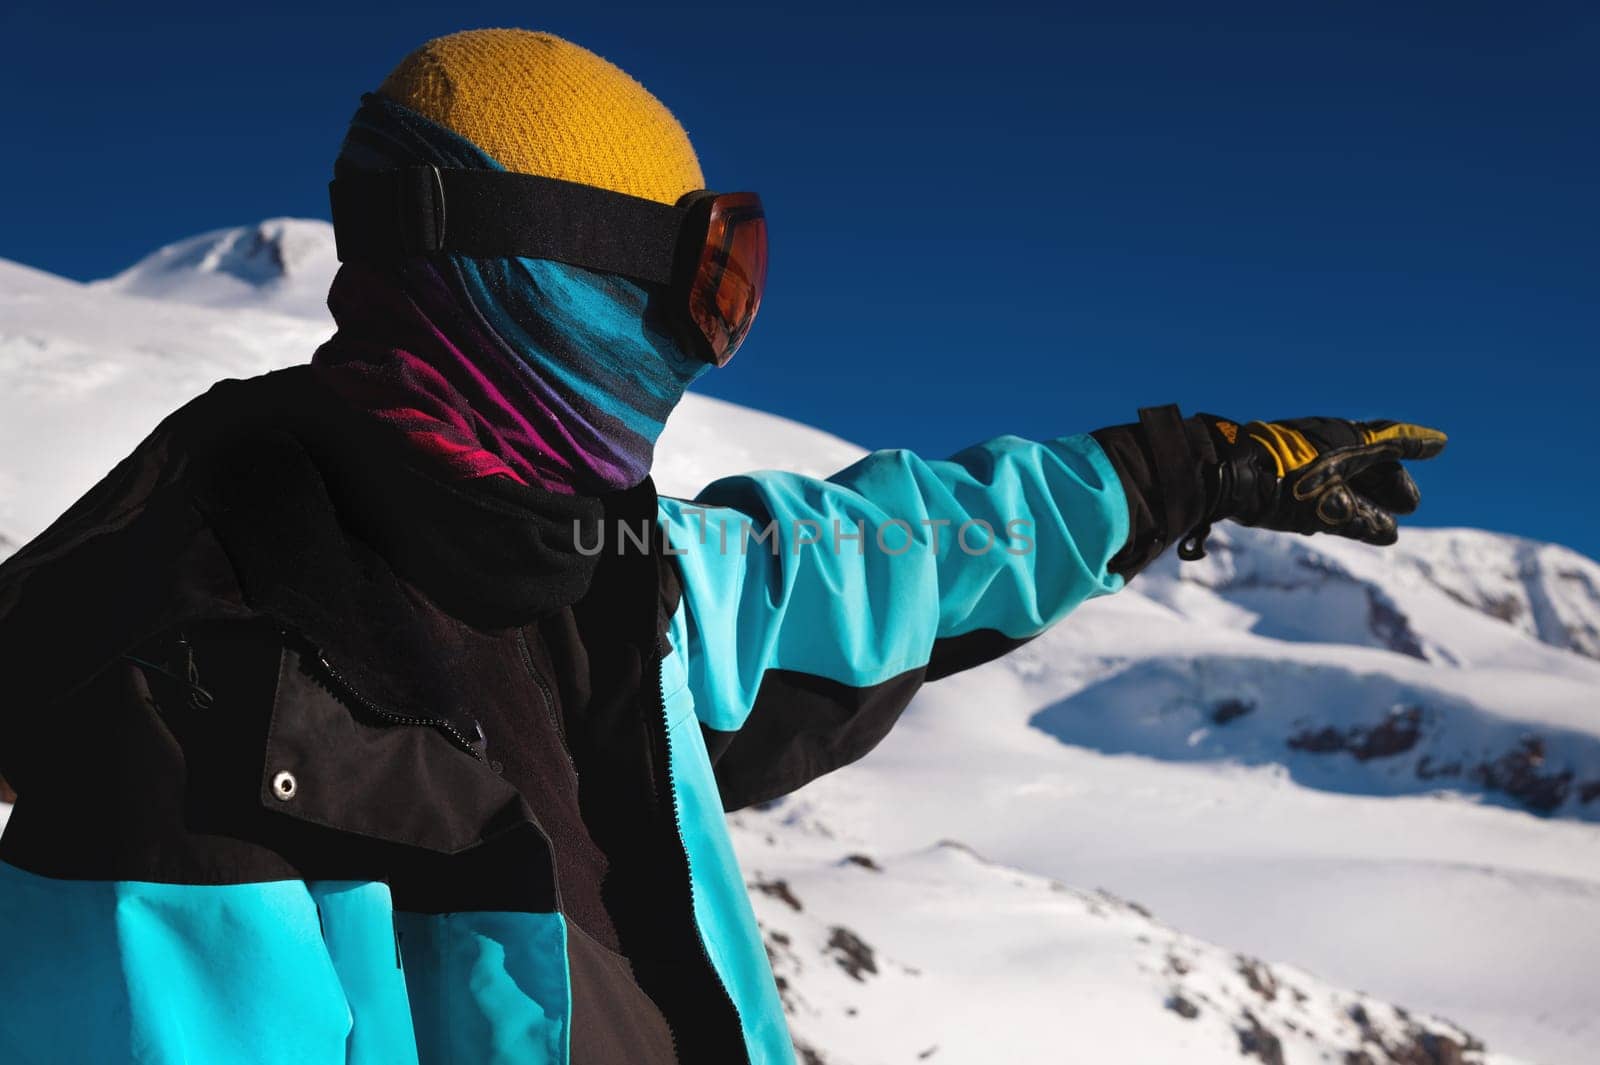 Sportsman pointing with his hand while skiing on a snowy slope. A traveler, a tourist, pointing his hand somewhere in the direction of the mountains. Winter sports activity by yanik88